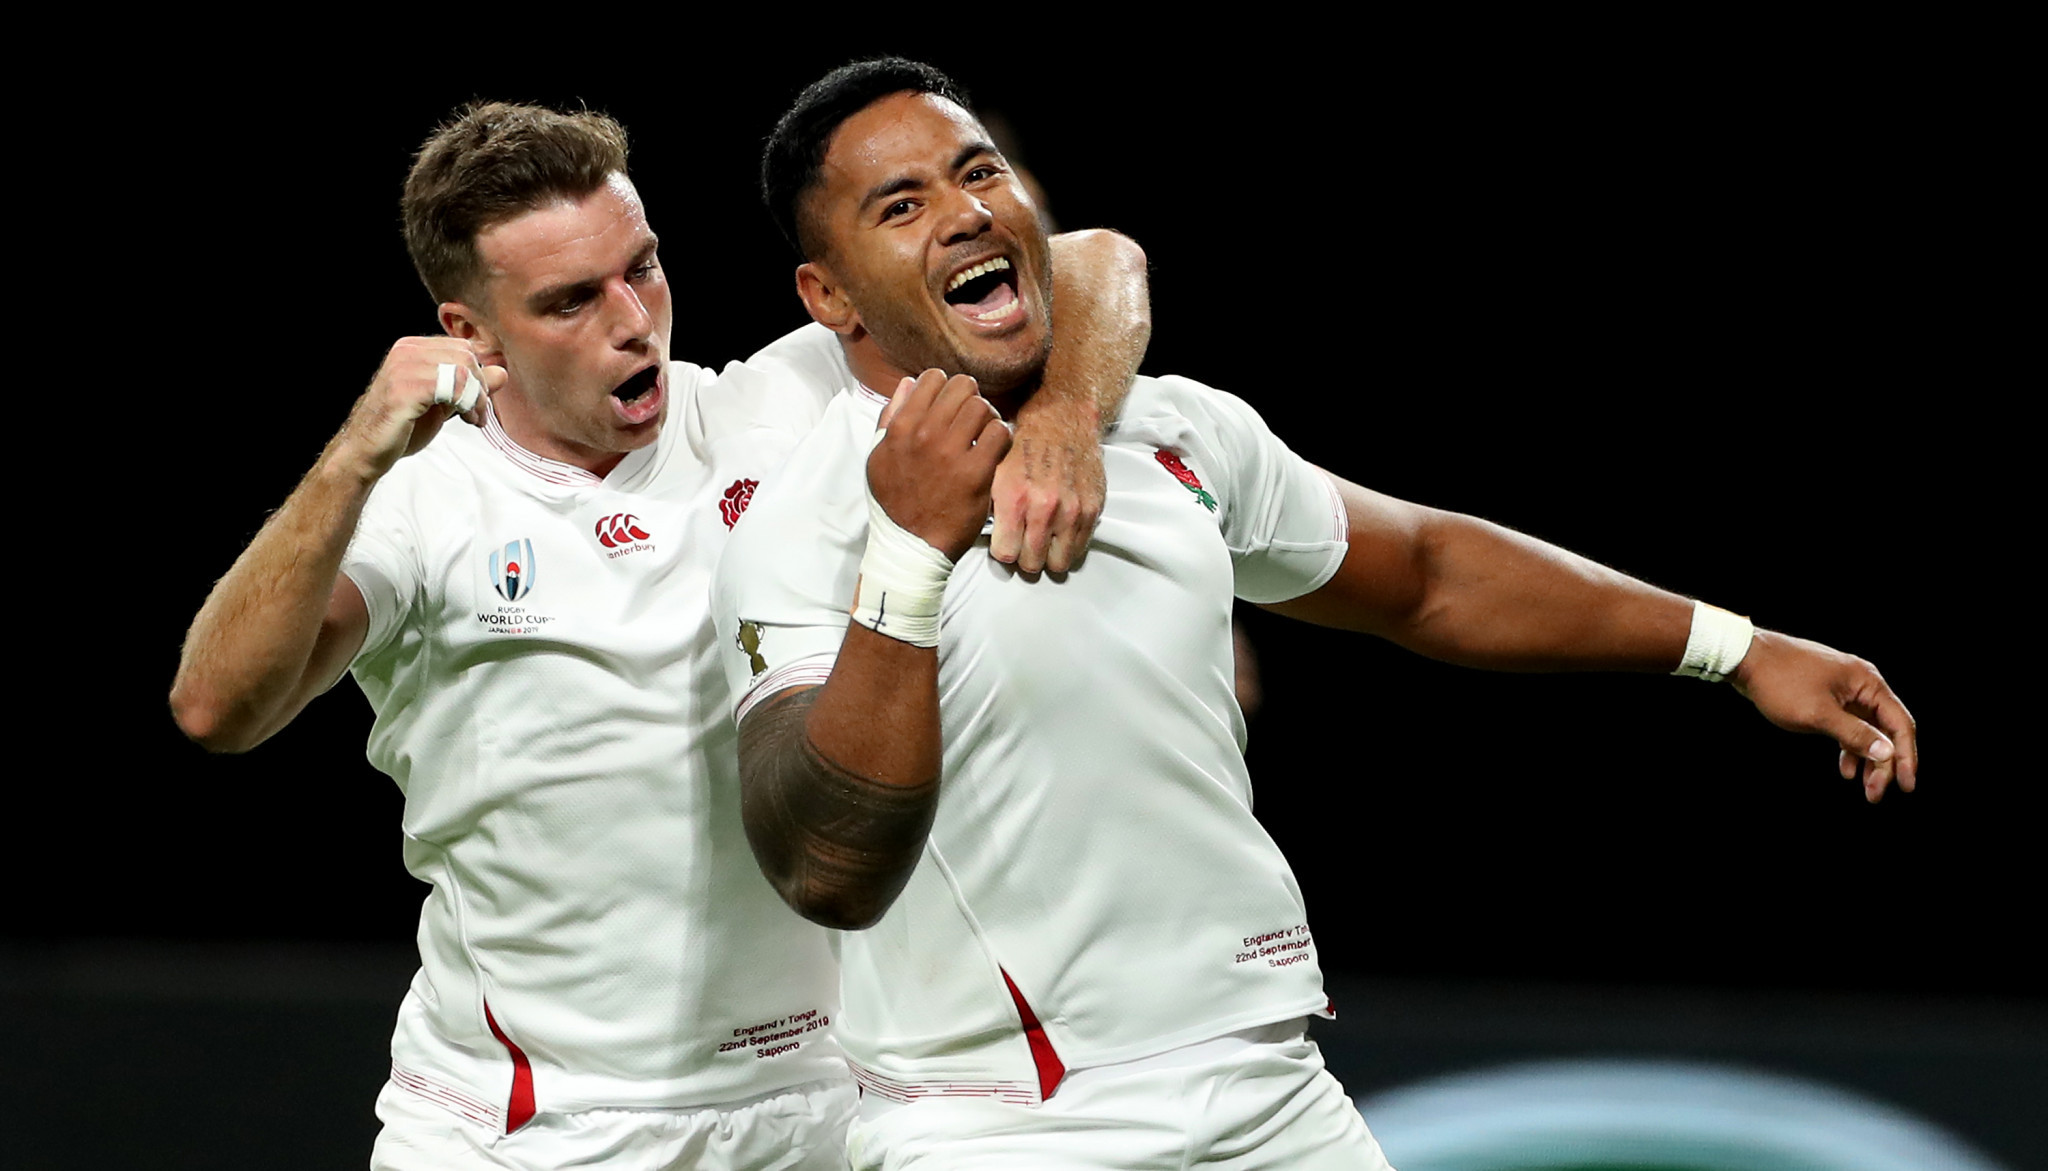 Manu Tuilagi, right, scored a pair of first half tries for England as they beat Tonga ©Getty Images